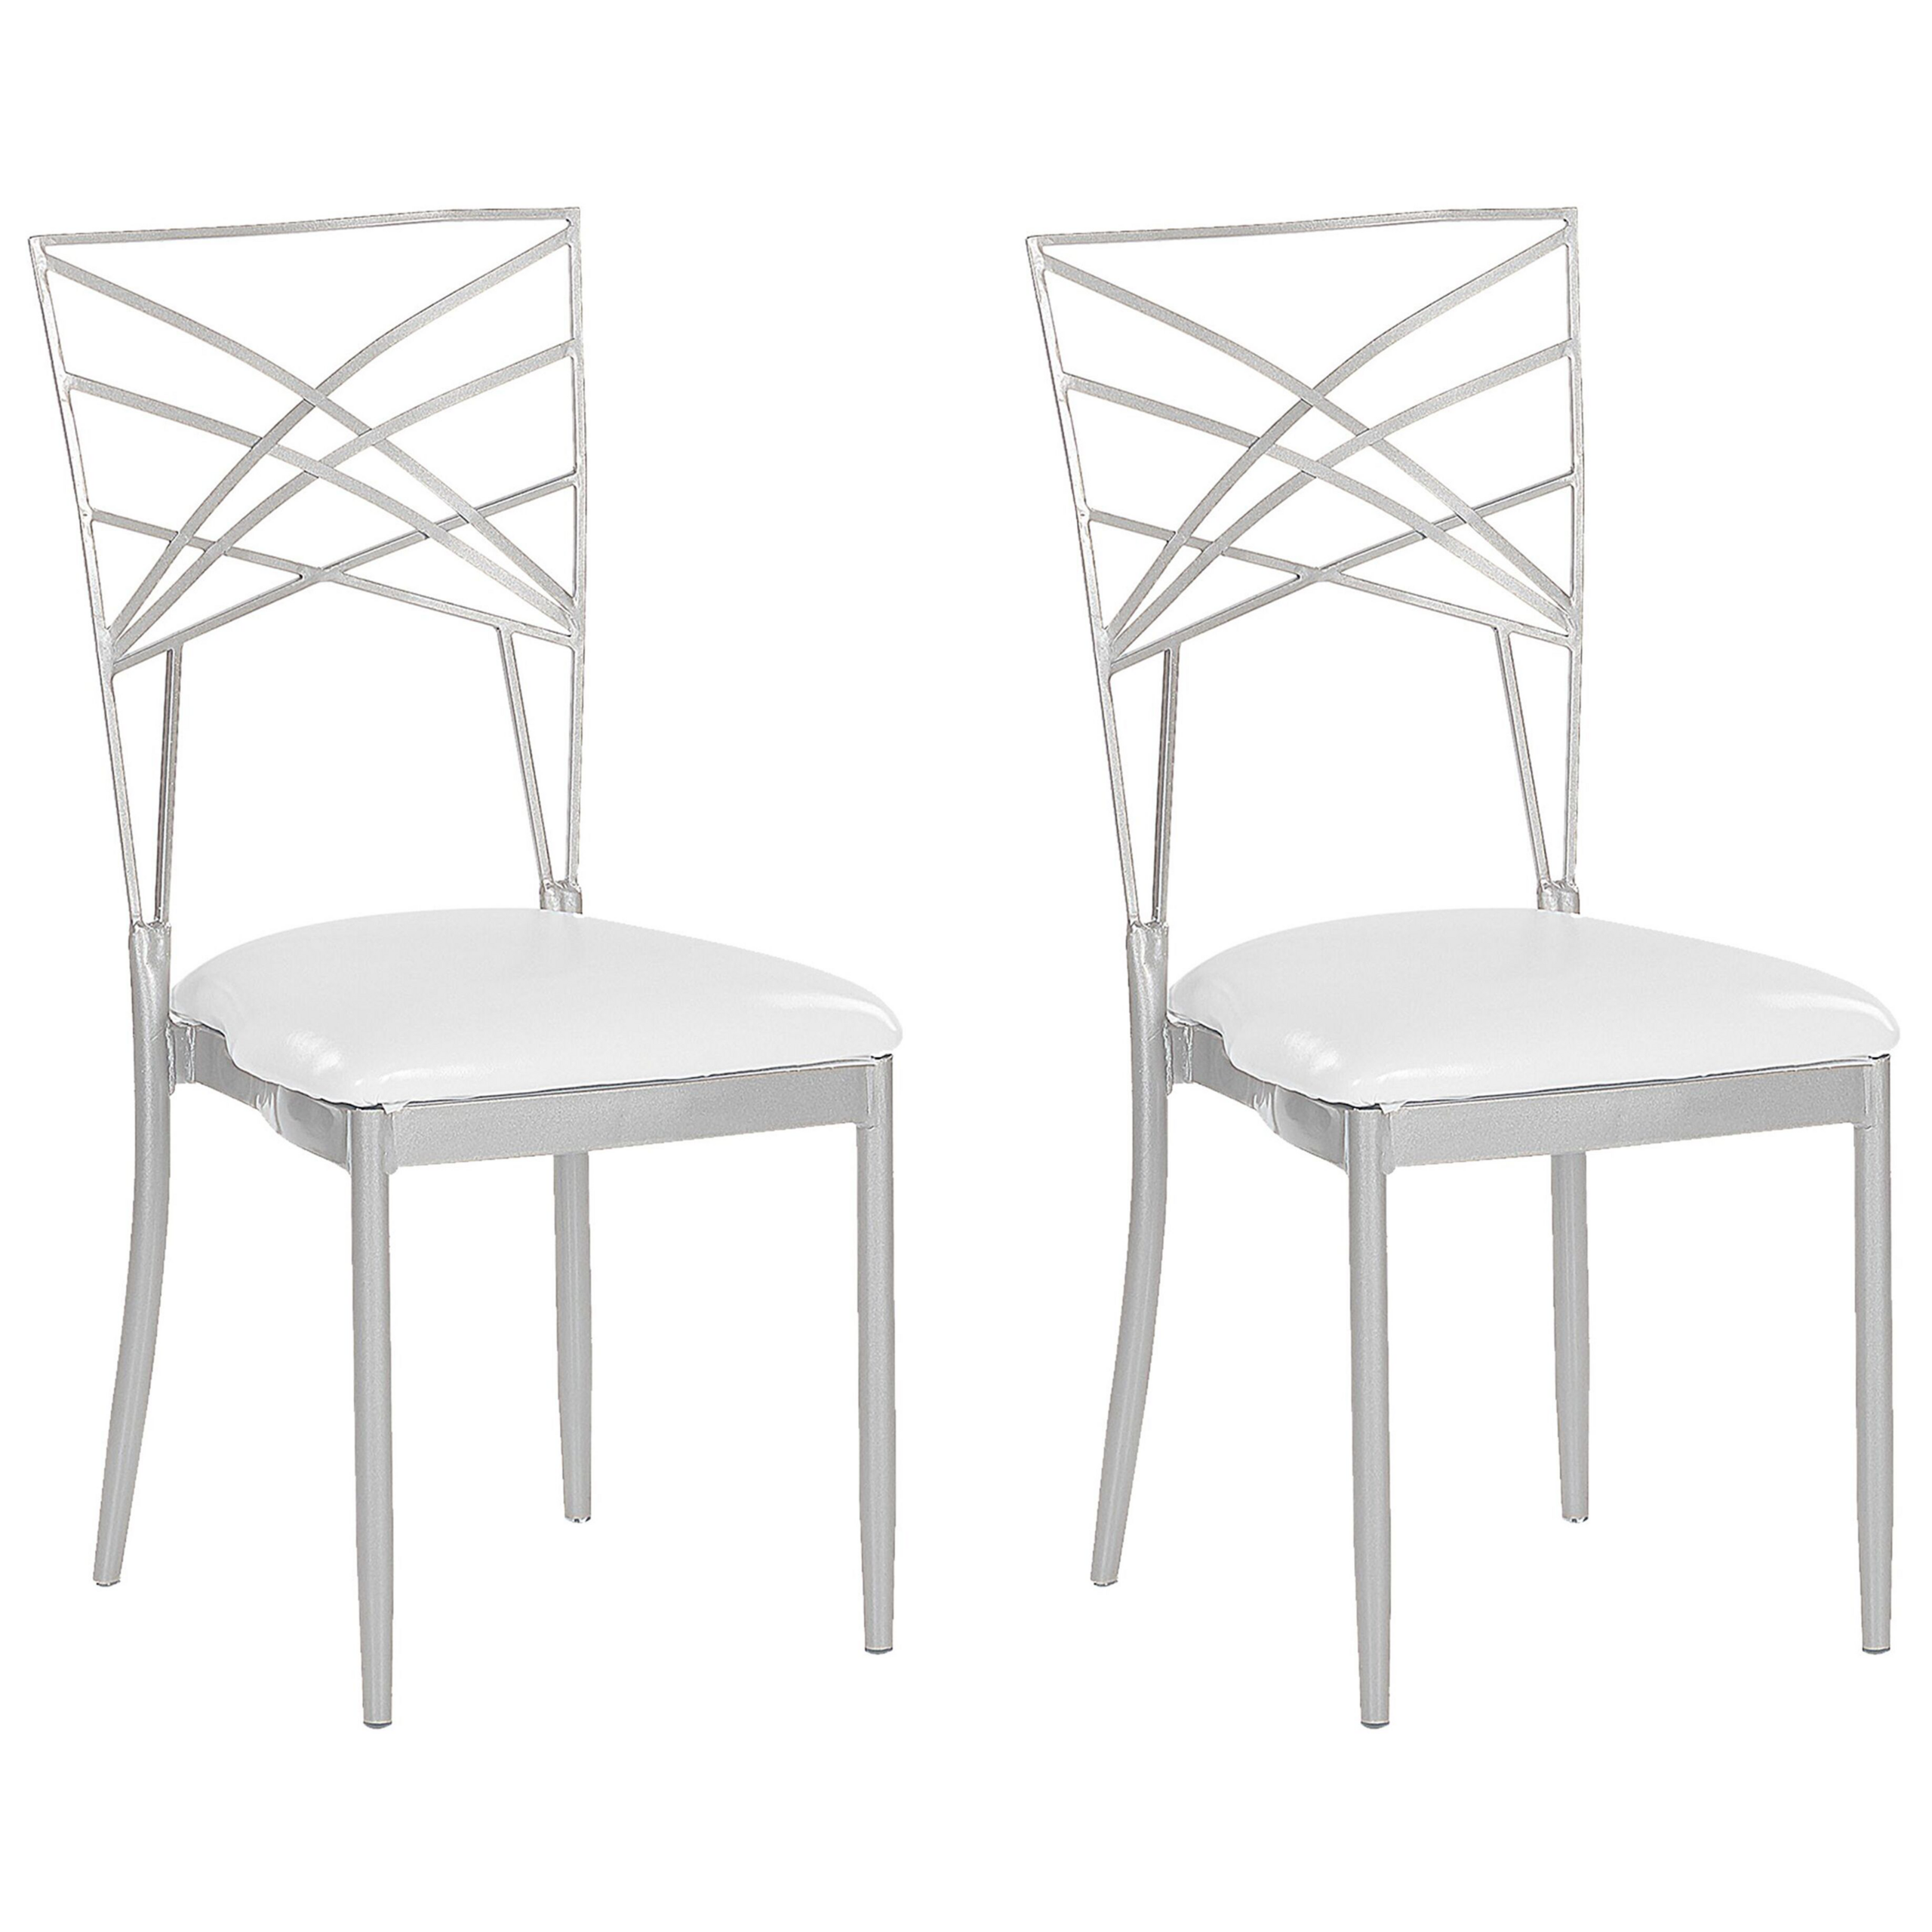 Beliani Set of 2 Dining Chairs Silver Metal Faux Leather White Seat Pad Accent Industrial Glam Style